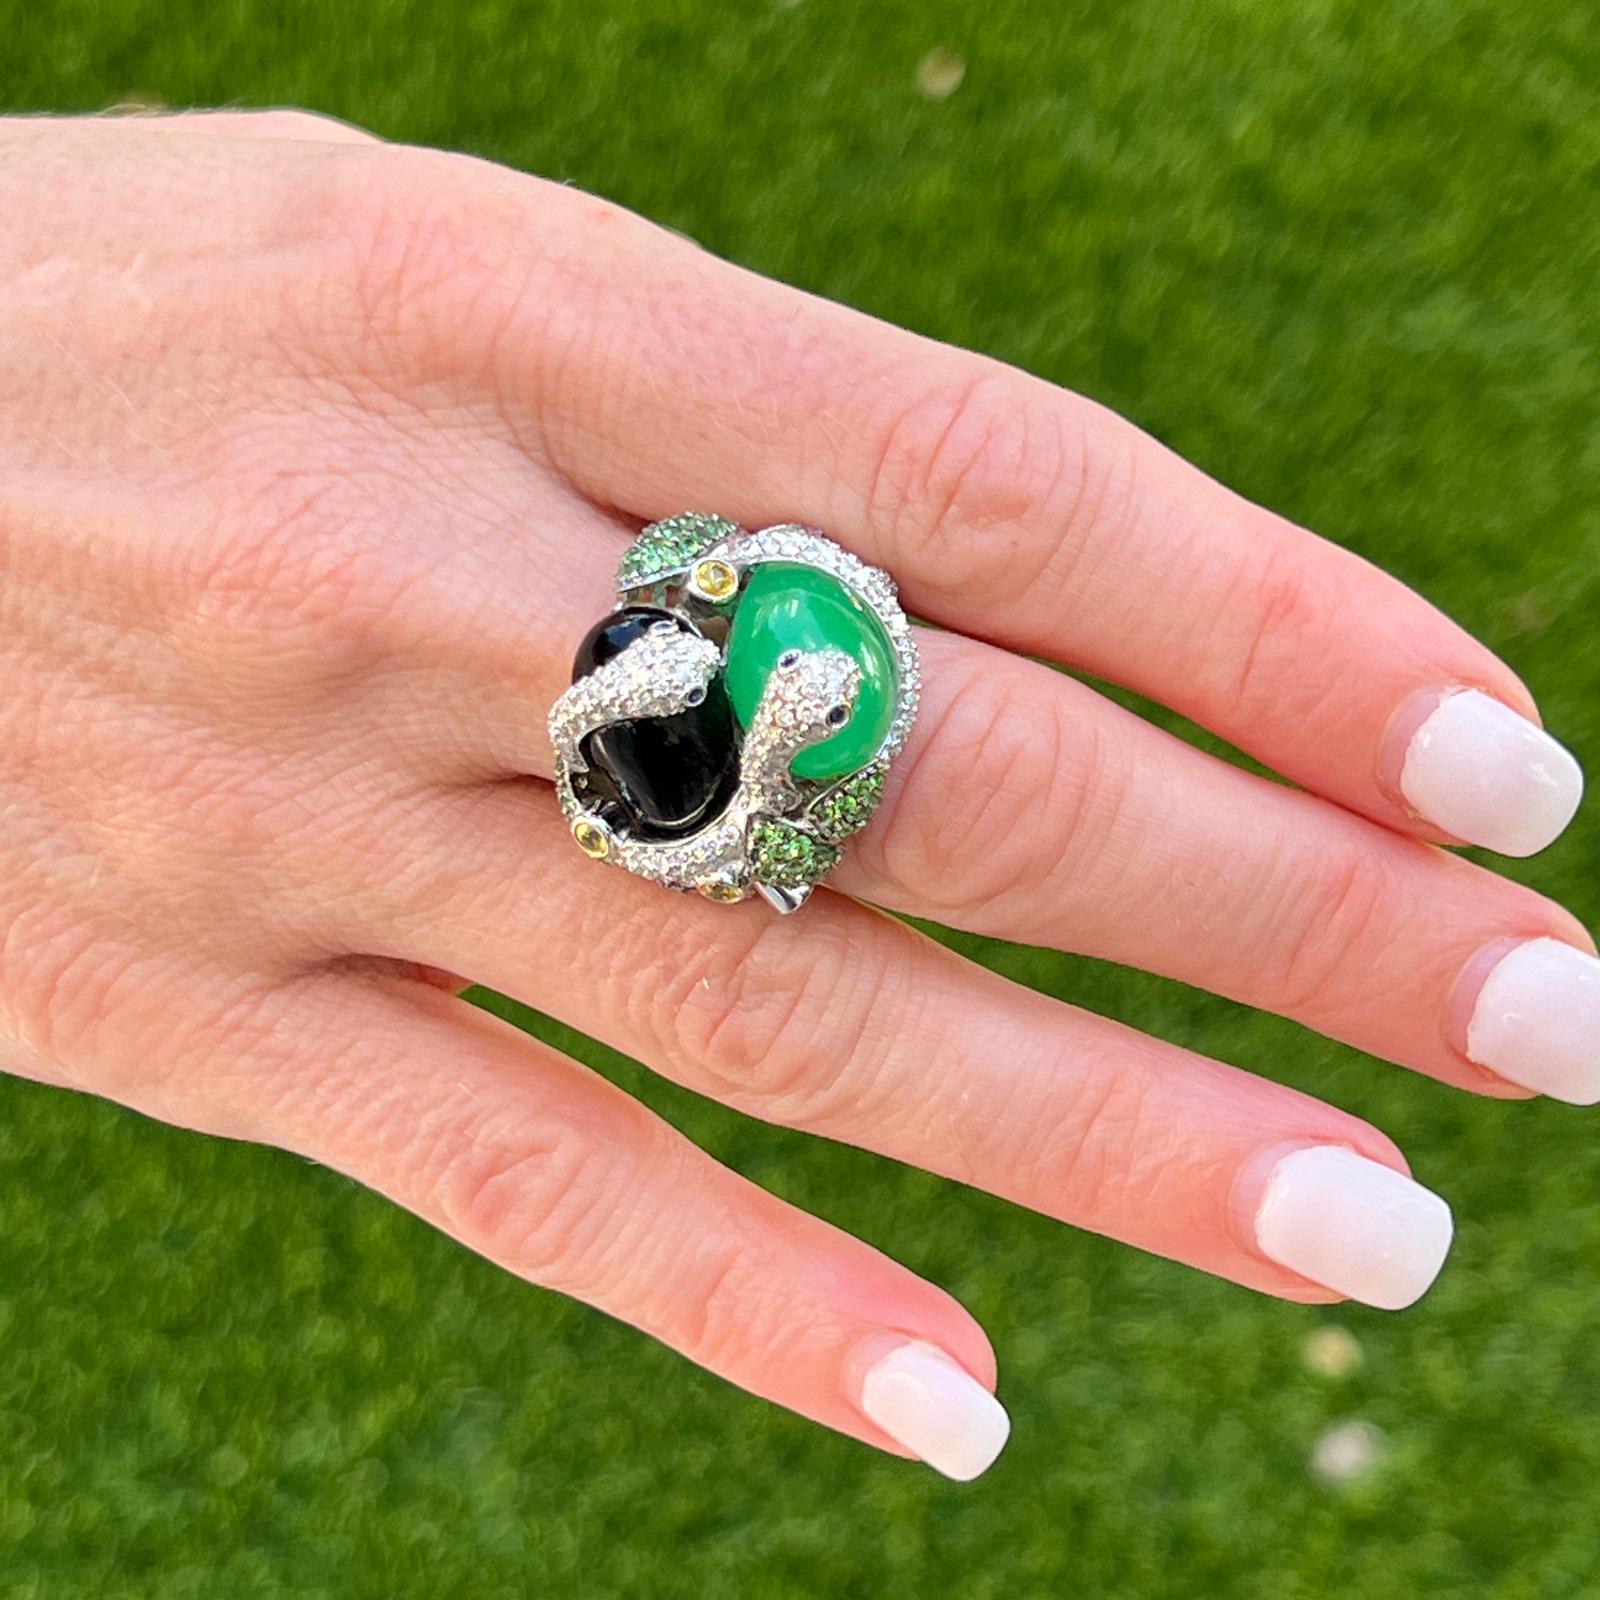 Fabulous and colorful snake ring fashioned in 18 karat white gold. The ring features cabochon emerald and onyx gemstones, diamonds, tsavorite, ruby, and yellow sapphires. The round brilliant cut diamonds weigh approximately 1.25 CTW and are graded